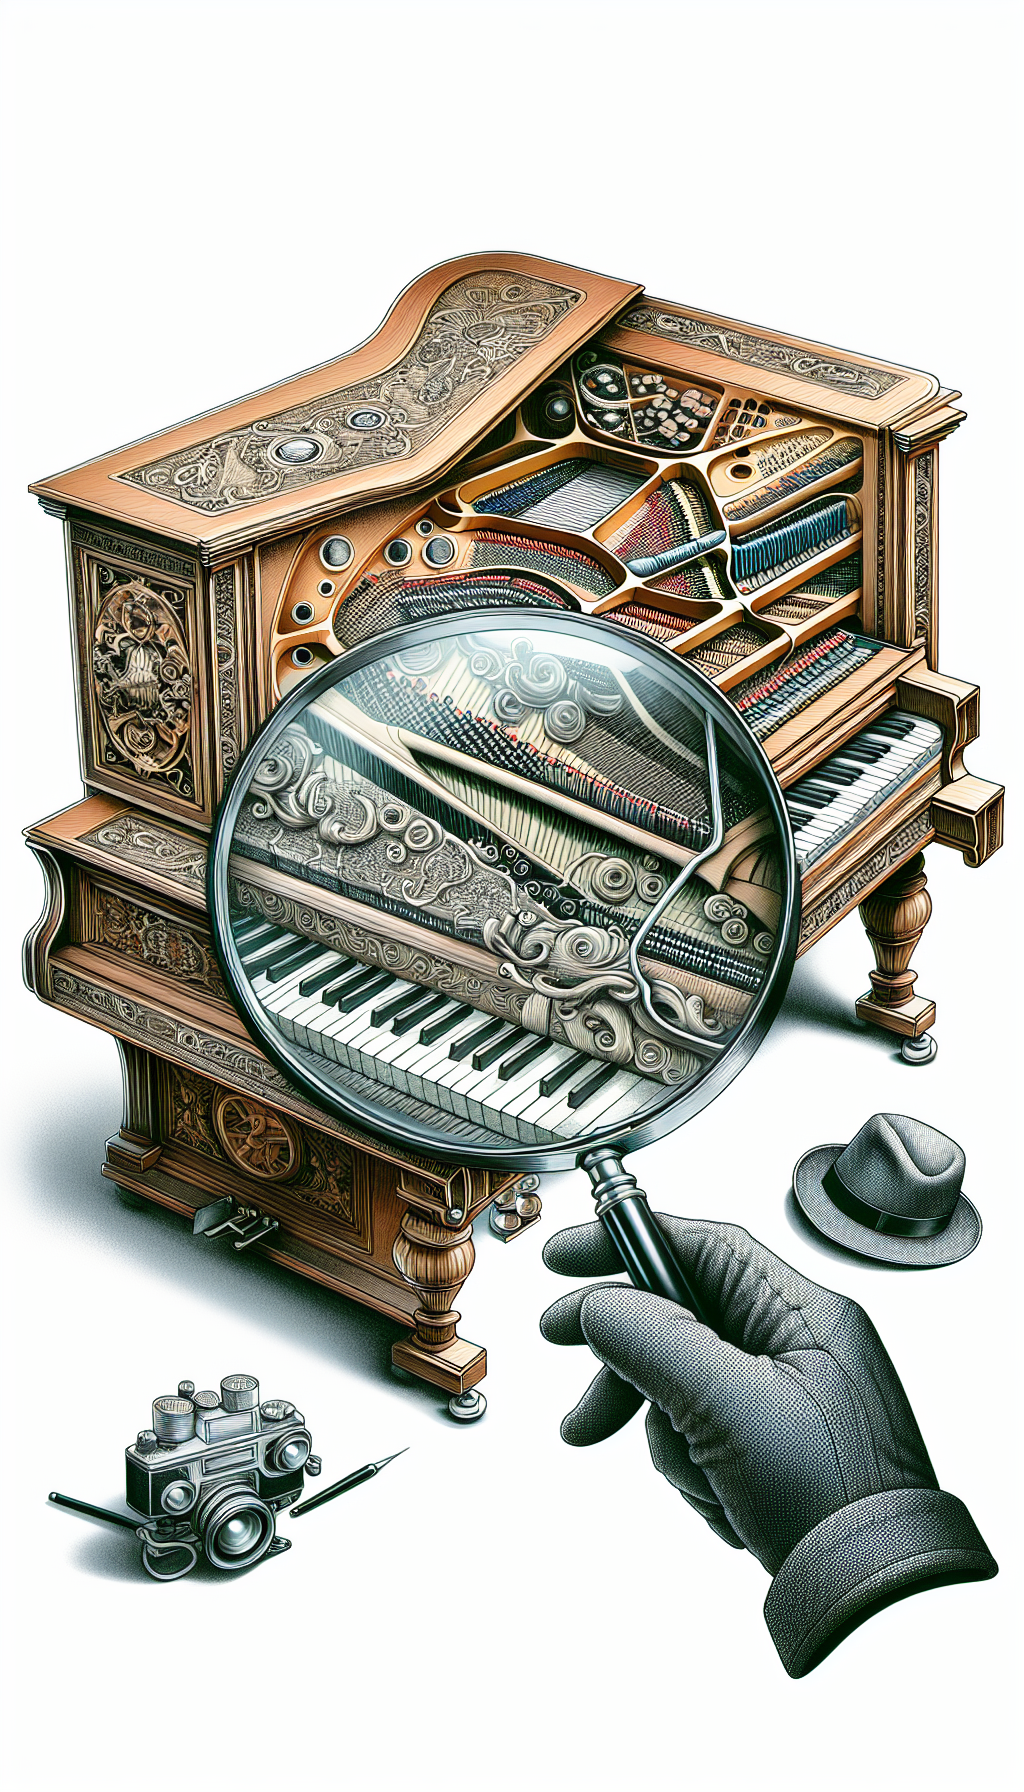 An illustration shows a magnifying glass hovering over an intricately designed section of an antique piano, with ornate carvings and historical style indicators becoming more visible under its lens. The magnifying glass reflects silhouettes of different piano eras—baroque, classical, romantic—while a detective hat atop the piano suggests the theme of investigation into the instrument's past.